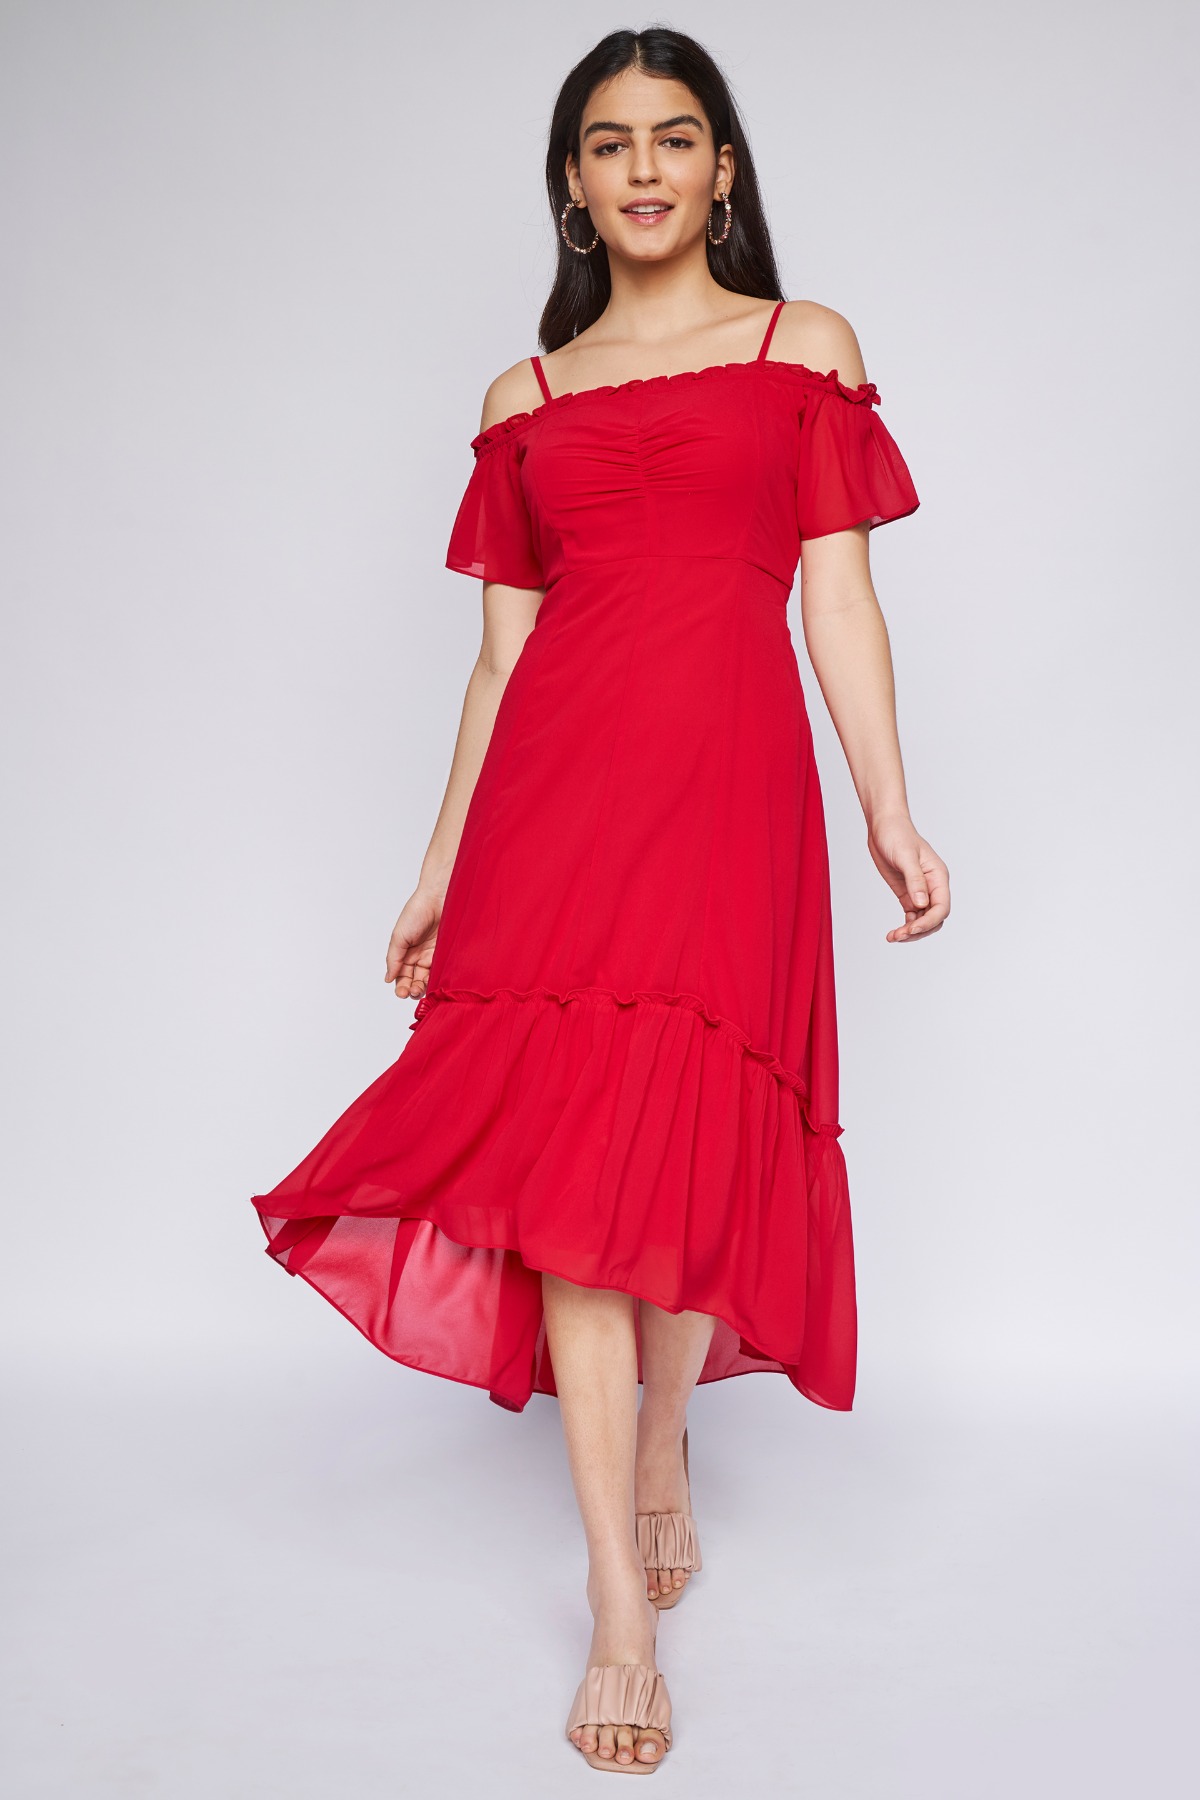 6 - Red Solid Fit & Flare Gown, image 6